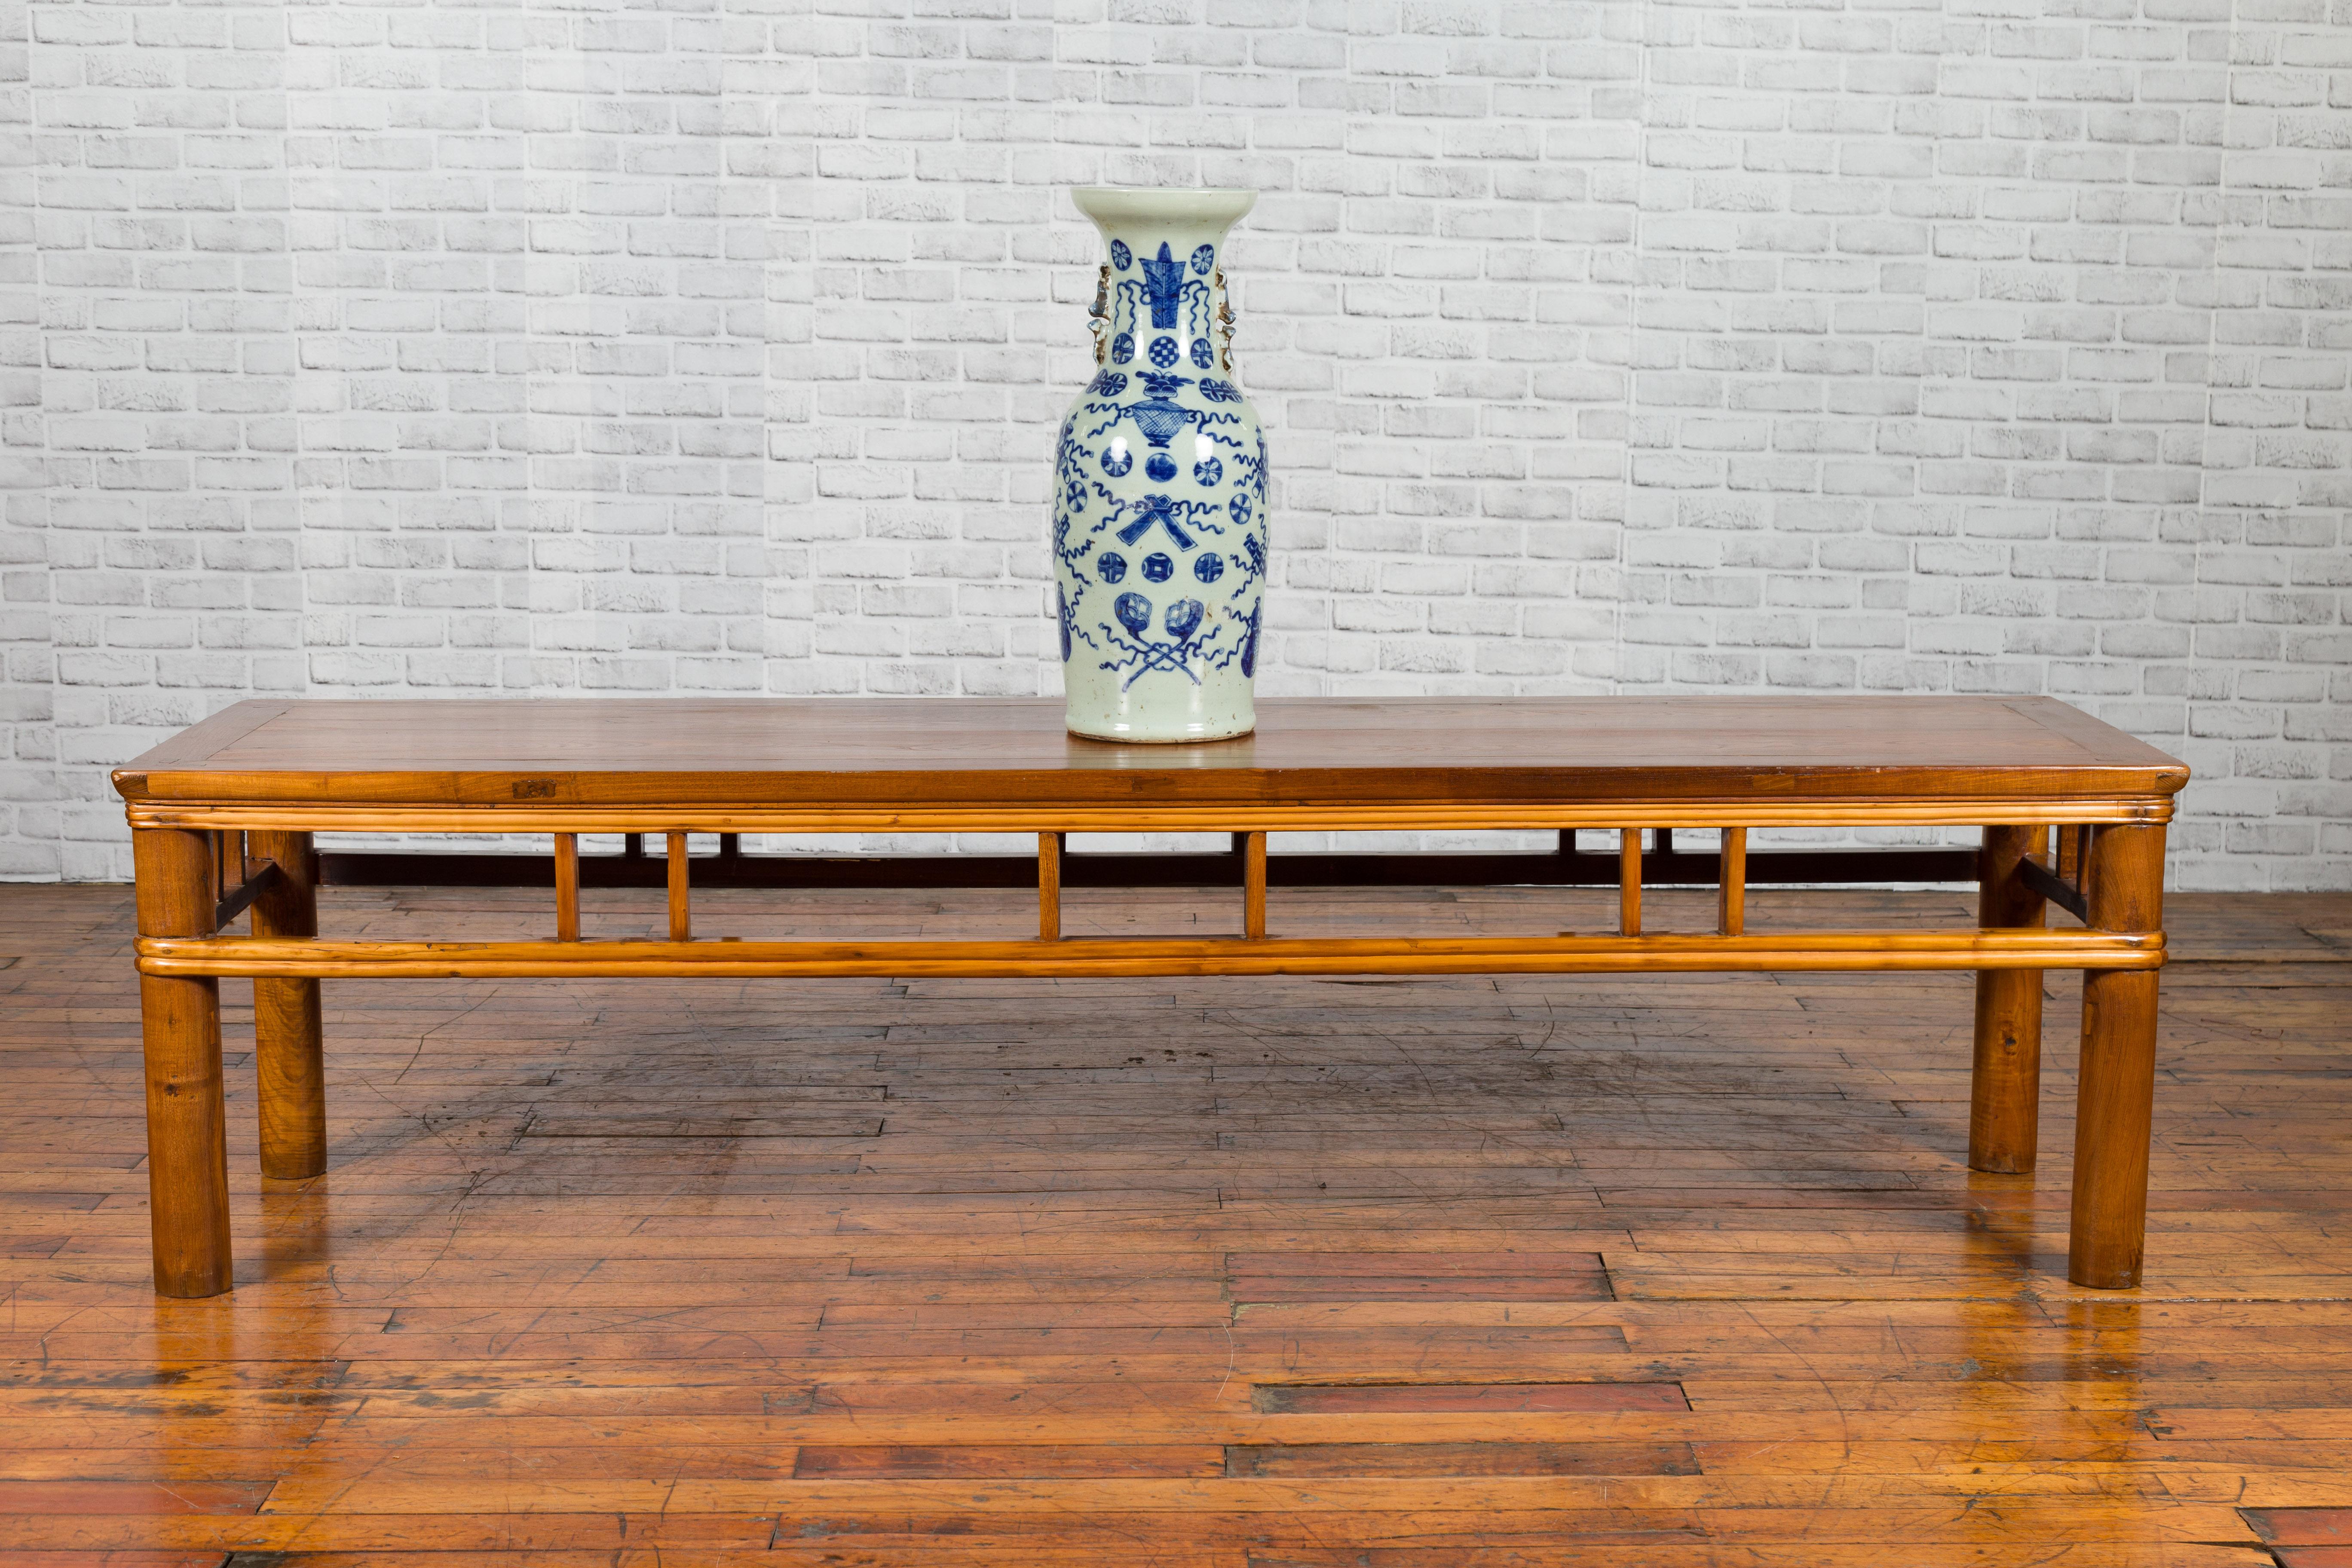 A Chinese late Qing Dynasty low table from the early 20th century, with pillar strut motifs and cylindrical legs. Probably cut down from an altar table, this late Qing Dynasty period low table features a rectangular top with central board, sitting